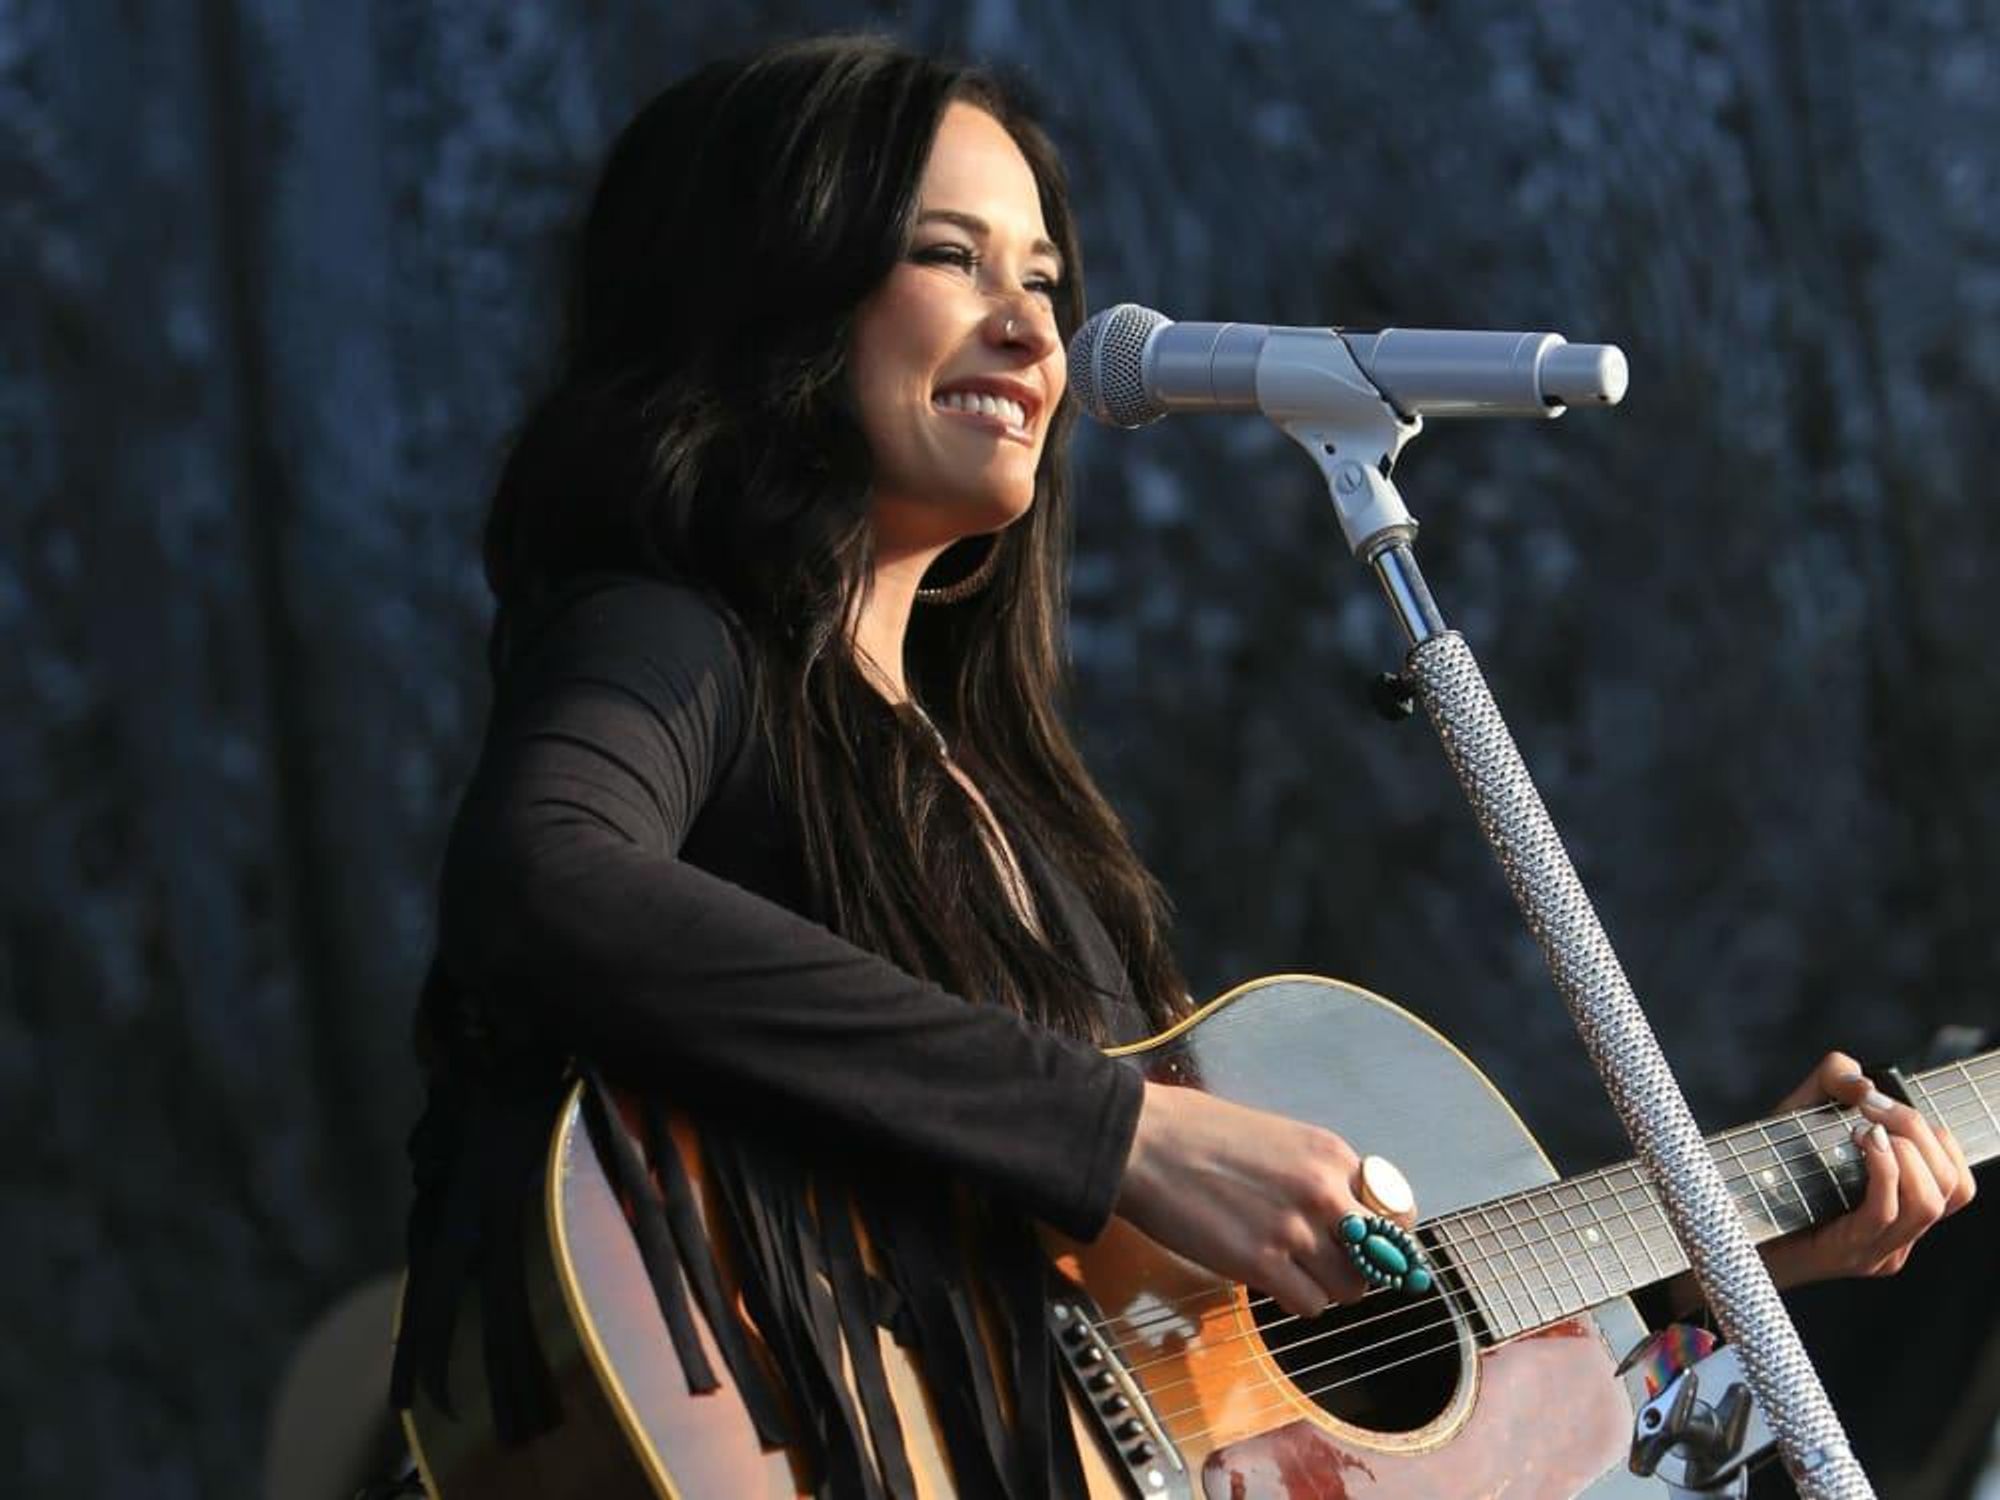 Spotify House SXSW party Kacey Musgraves March 2016